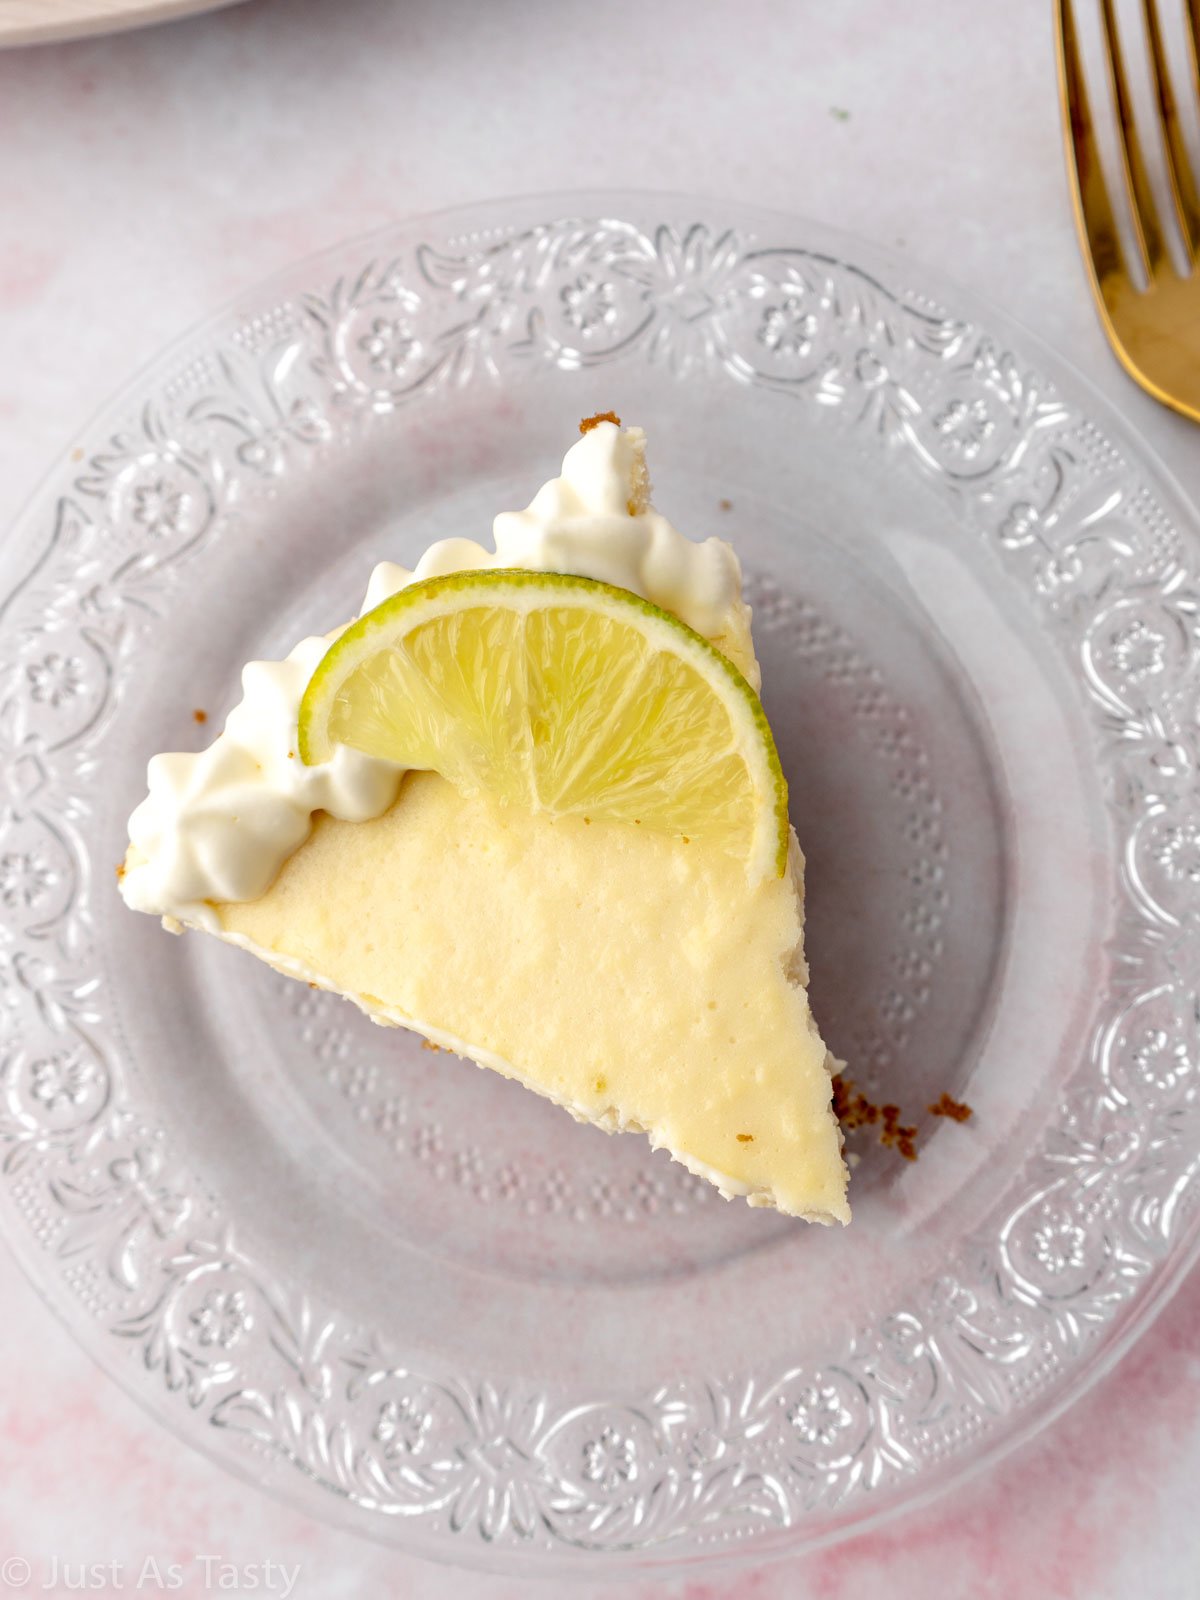 Slice of gluten free key lime pie on a glass plate.